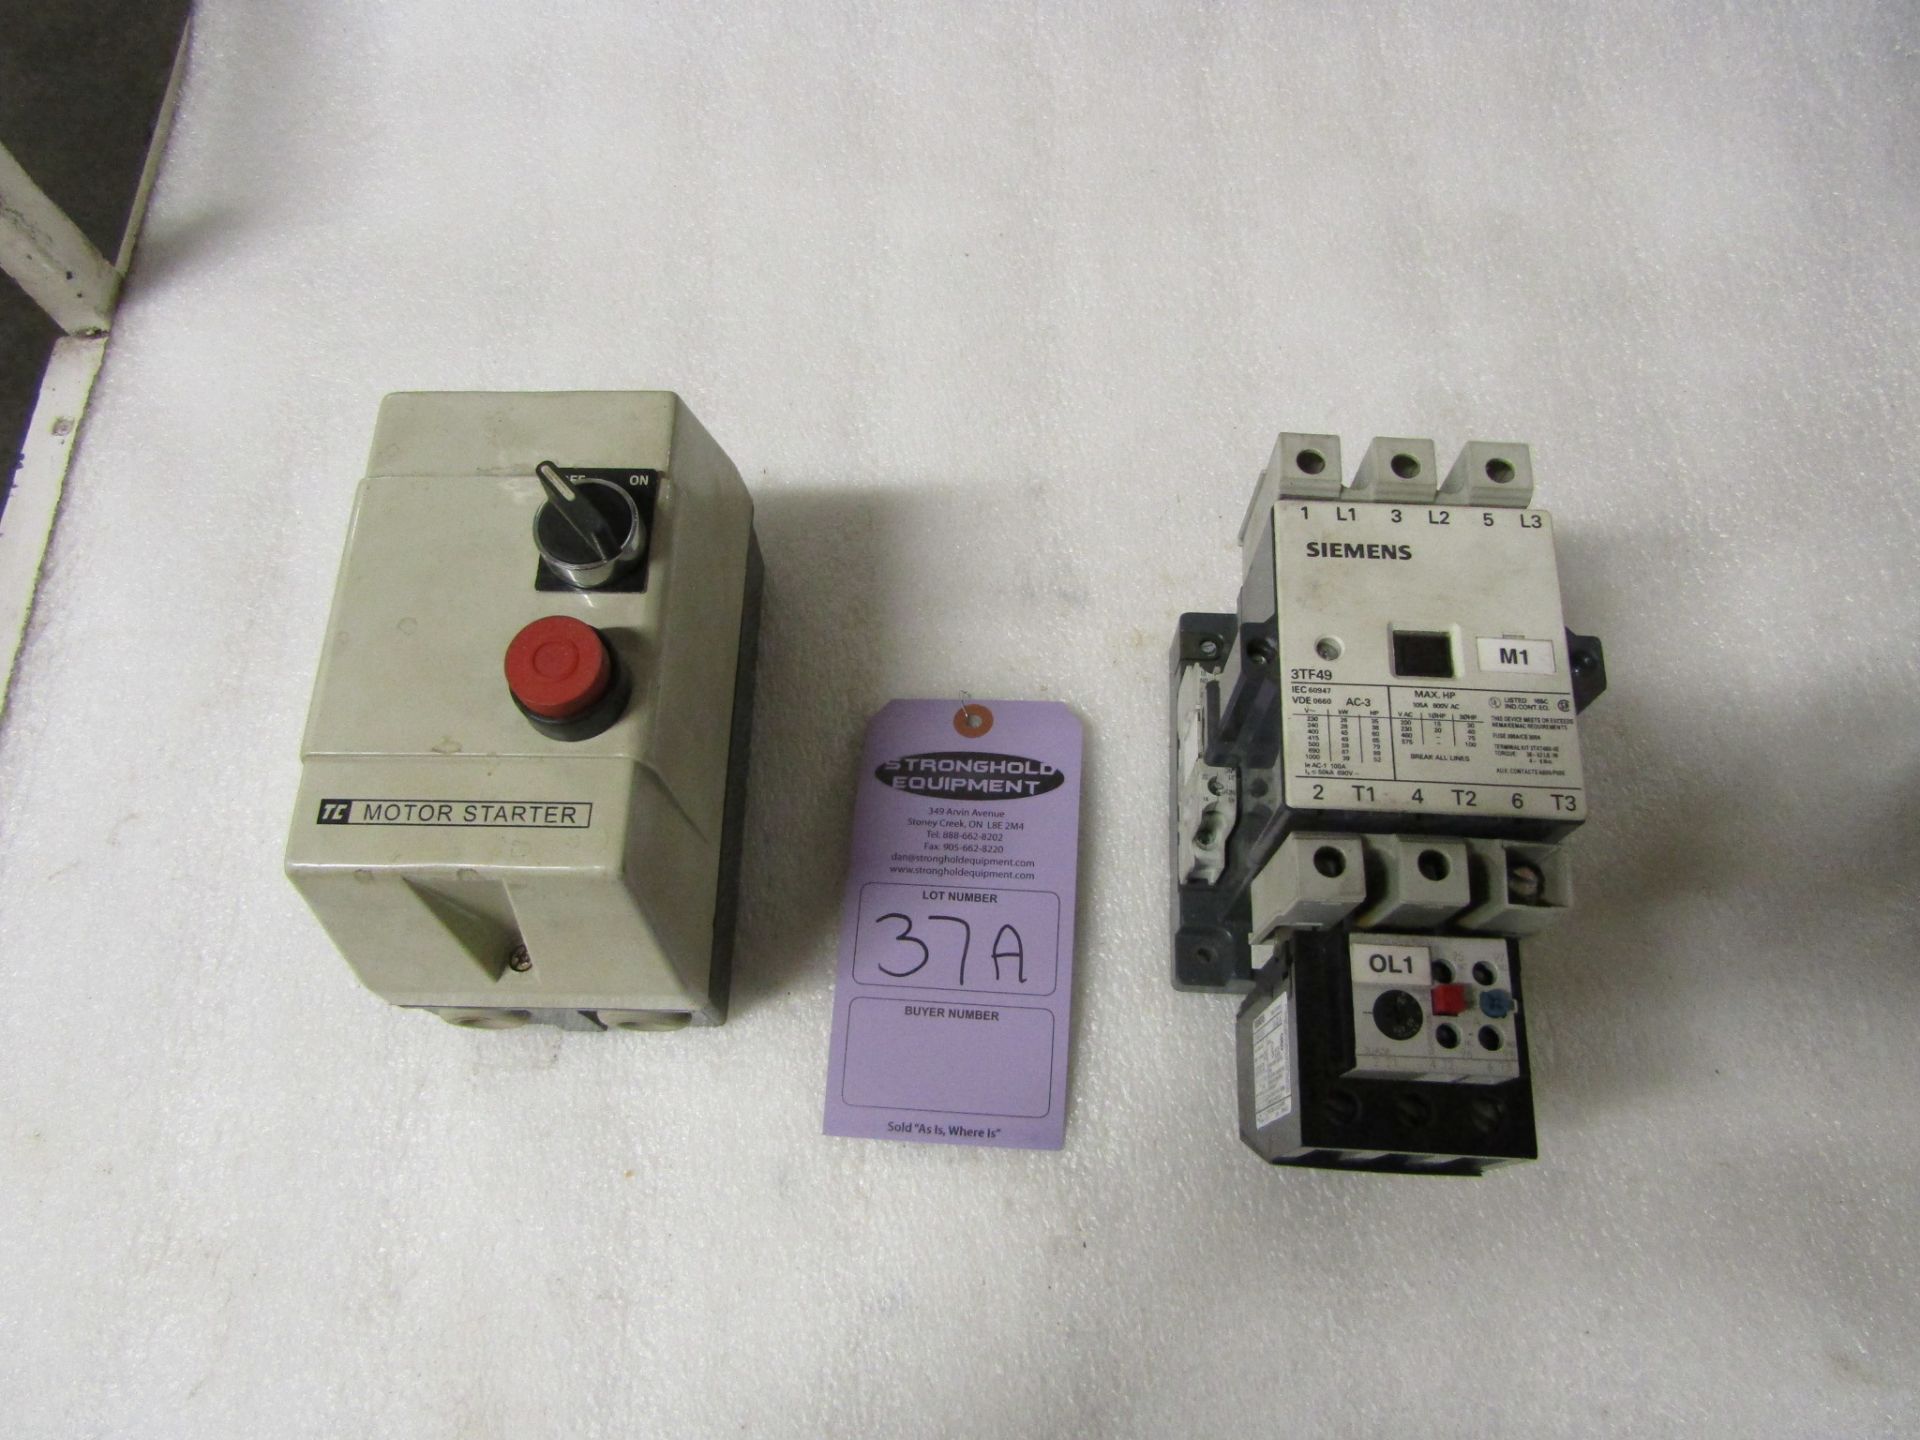 Siemens model 3TF49 Control with RC Motor Starter